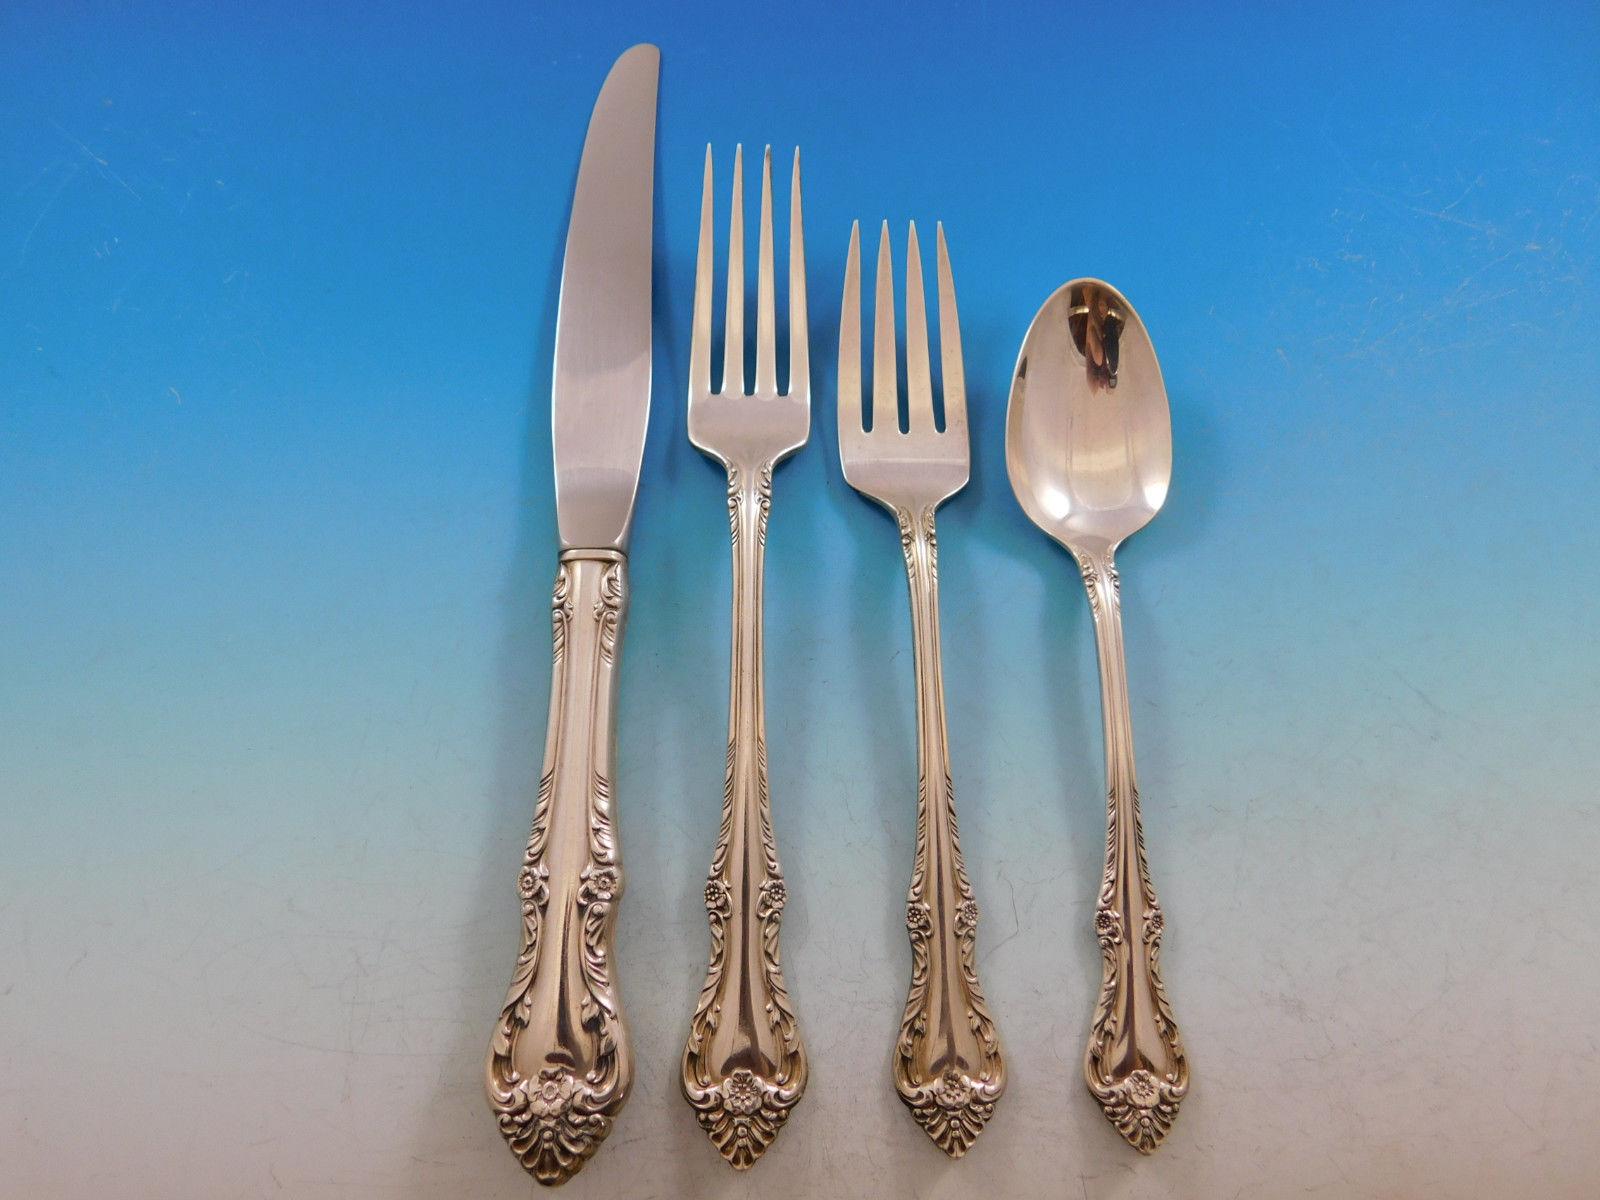 Heirloom quality Melbourne by Oneida sterling silver flatware set of 30 pieces. Great starter set! This set includes:

6 knives, 8 7/8